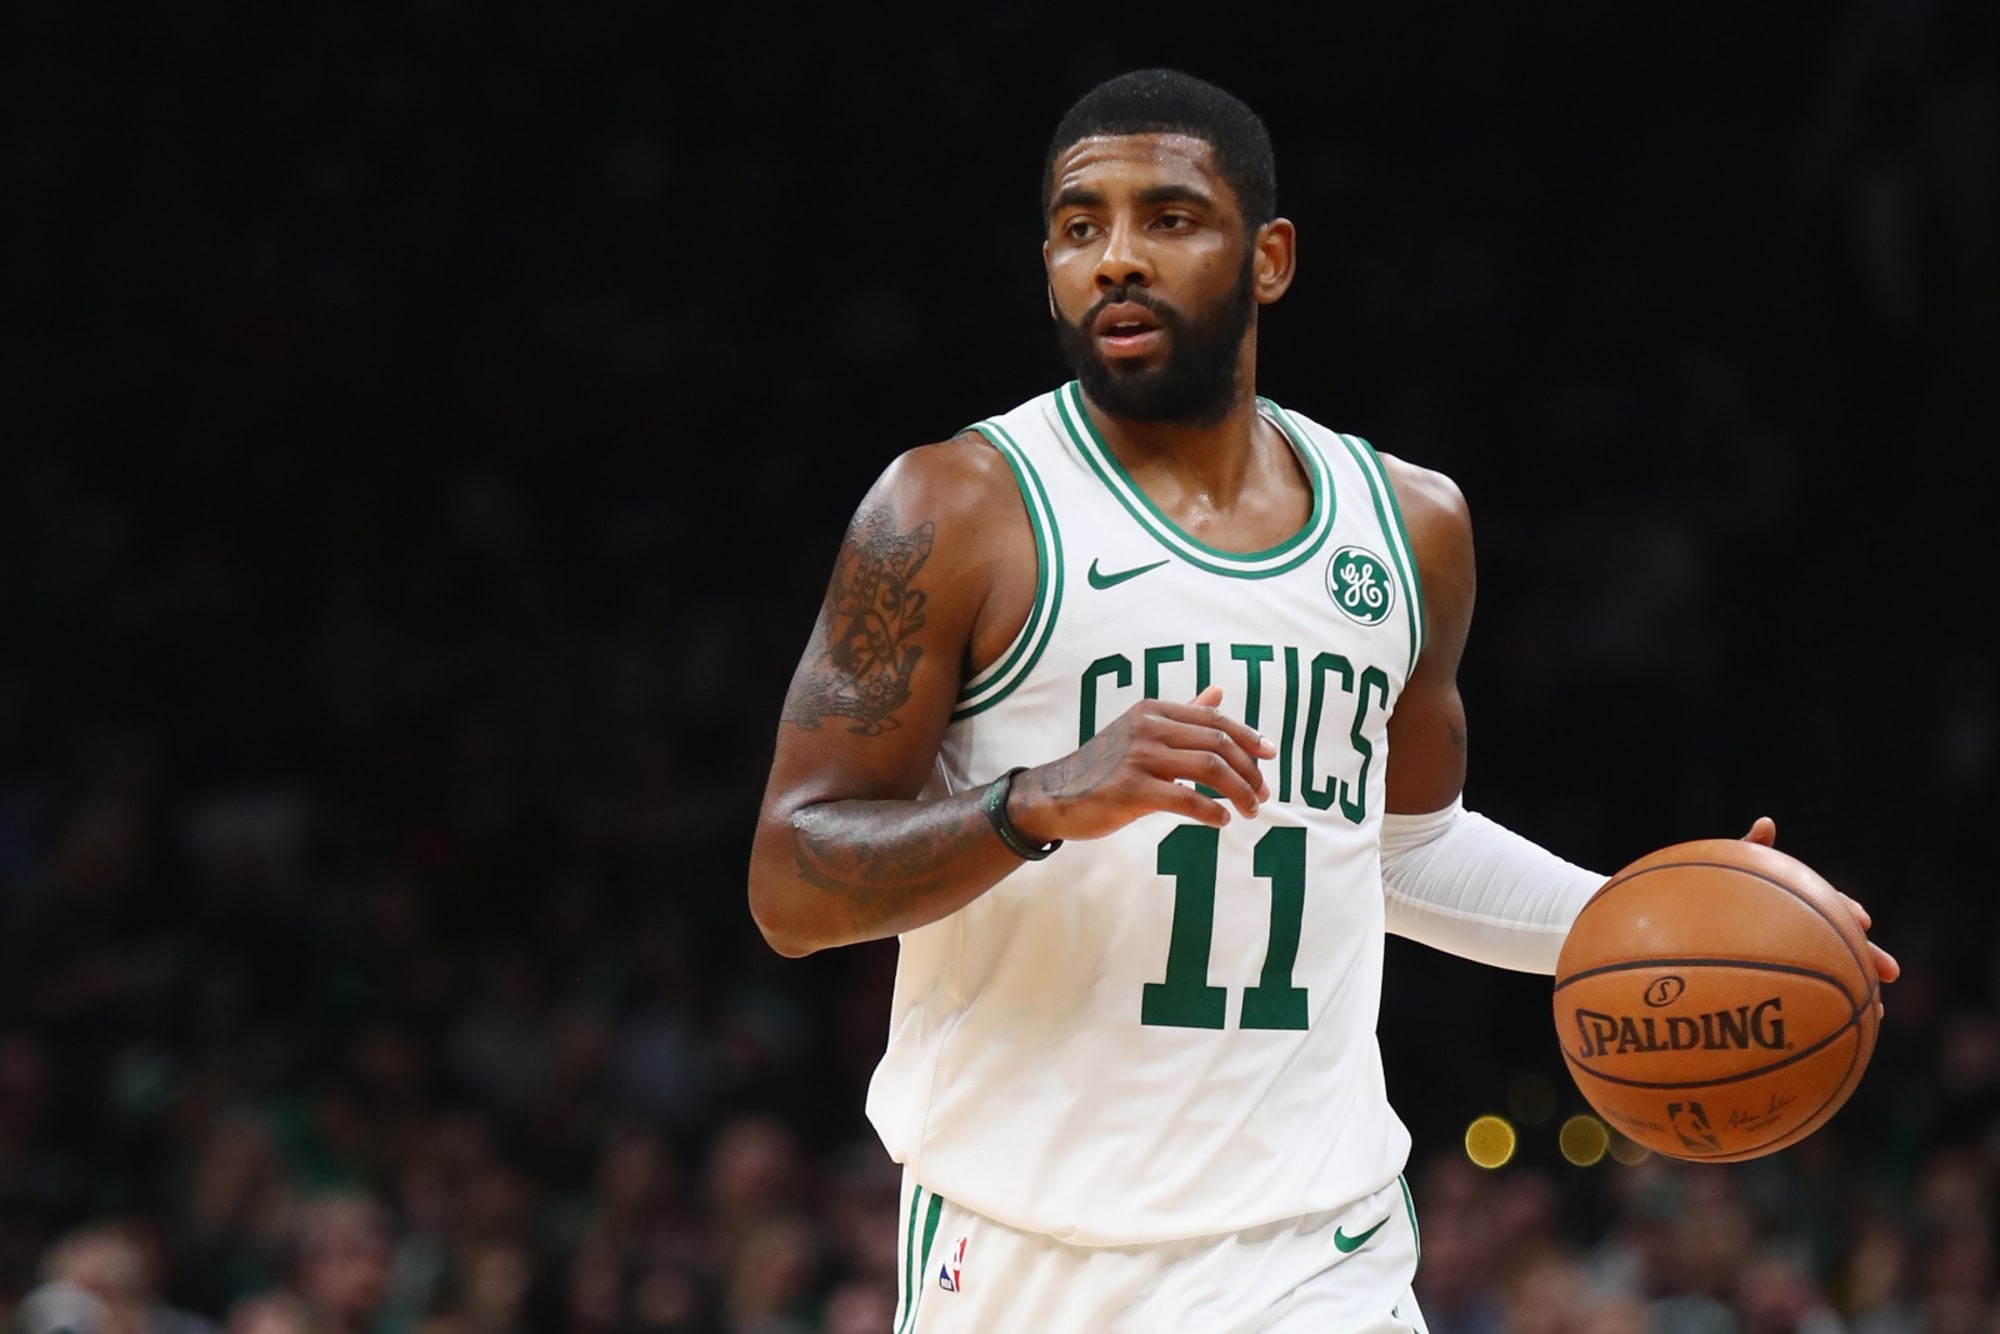 NBA Free Agency: Kyrie Irving agrees to max extension with